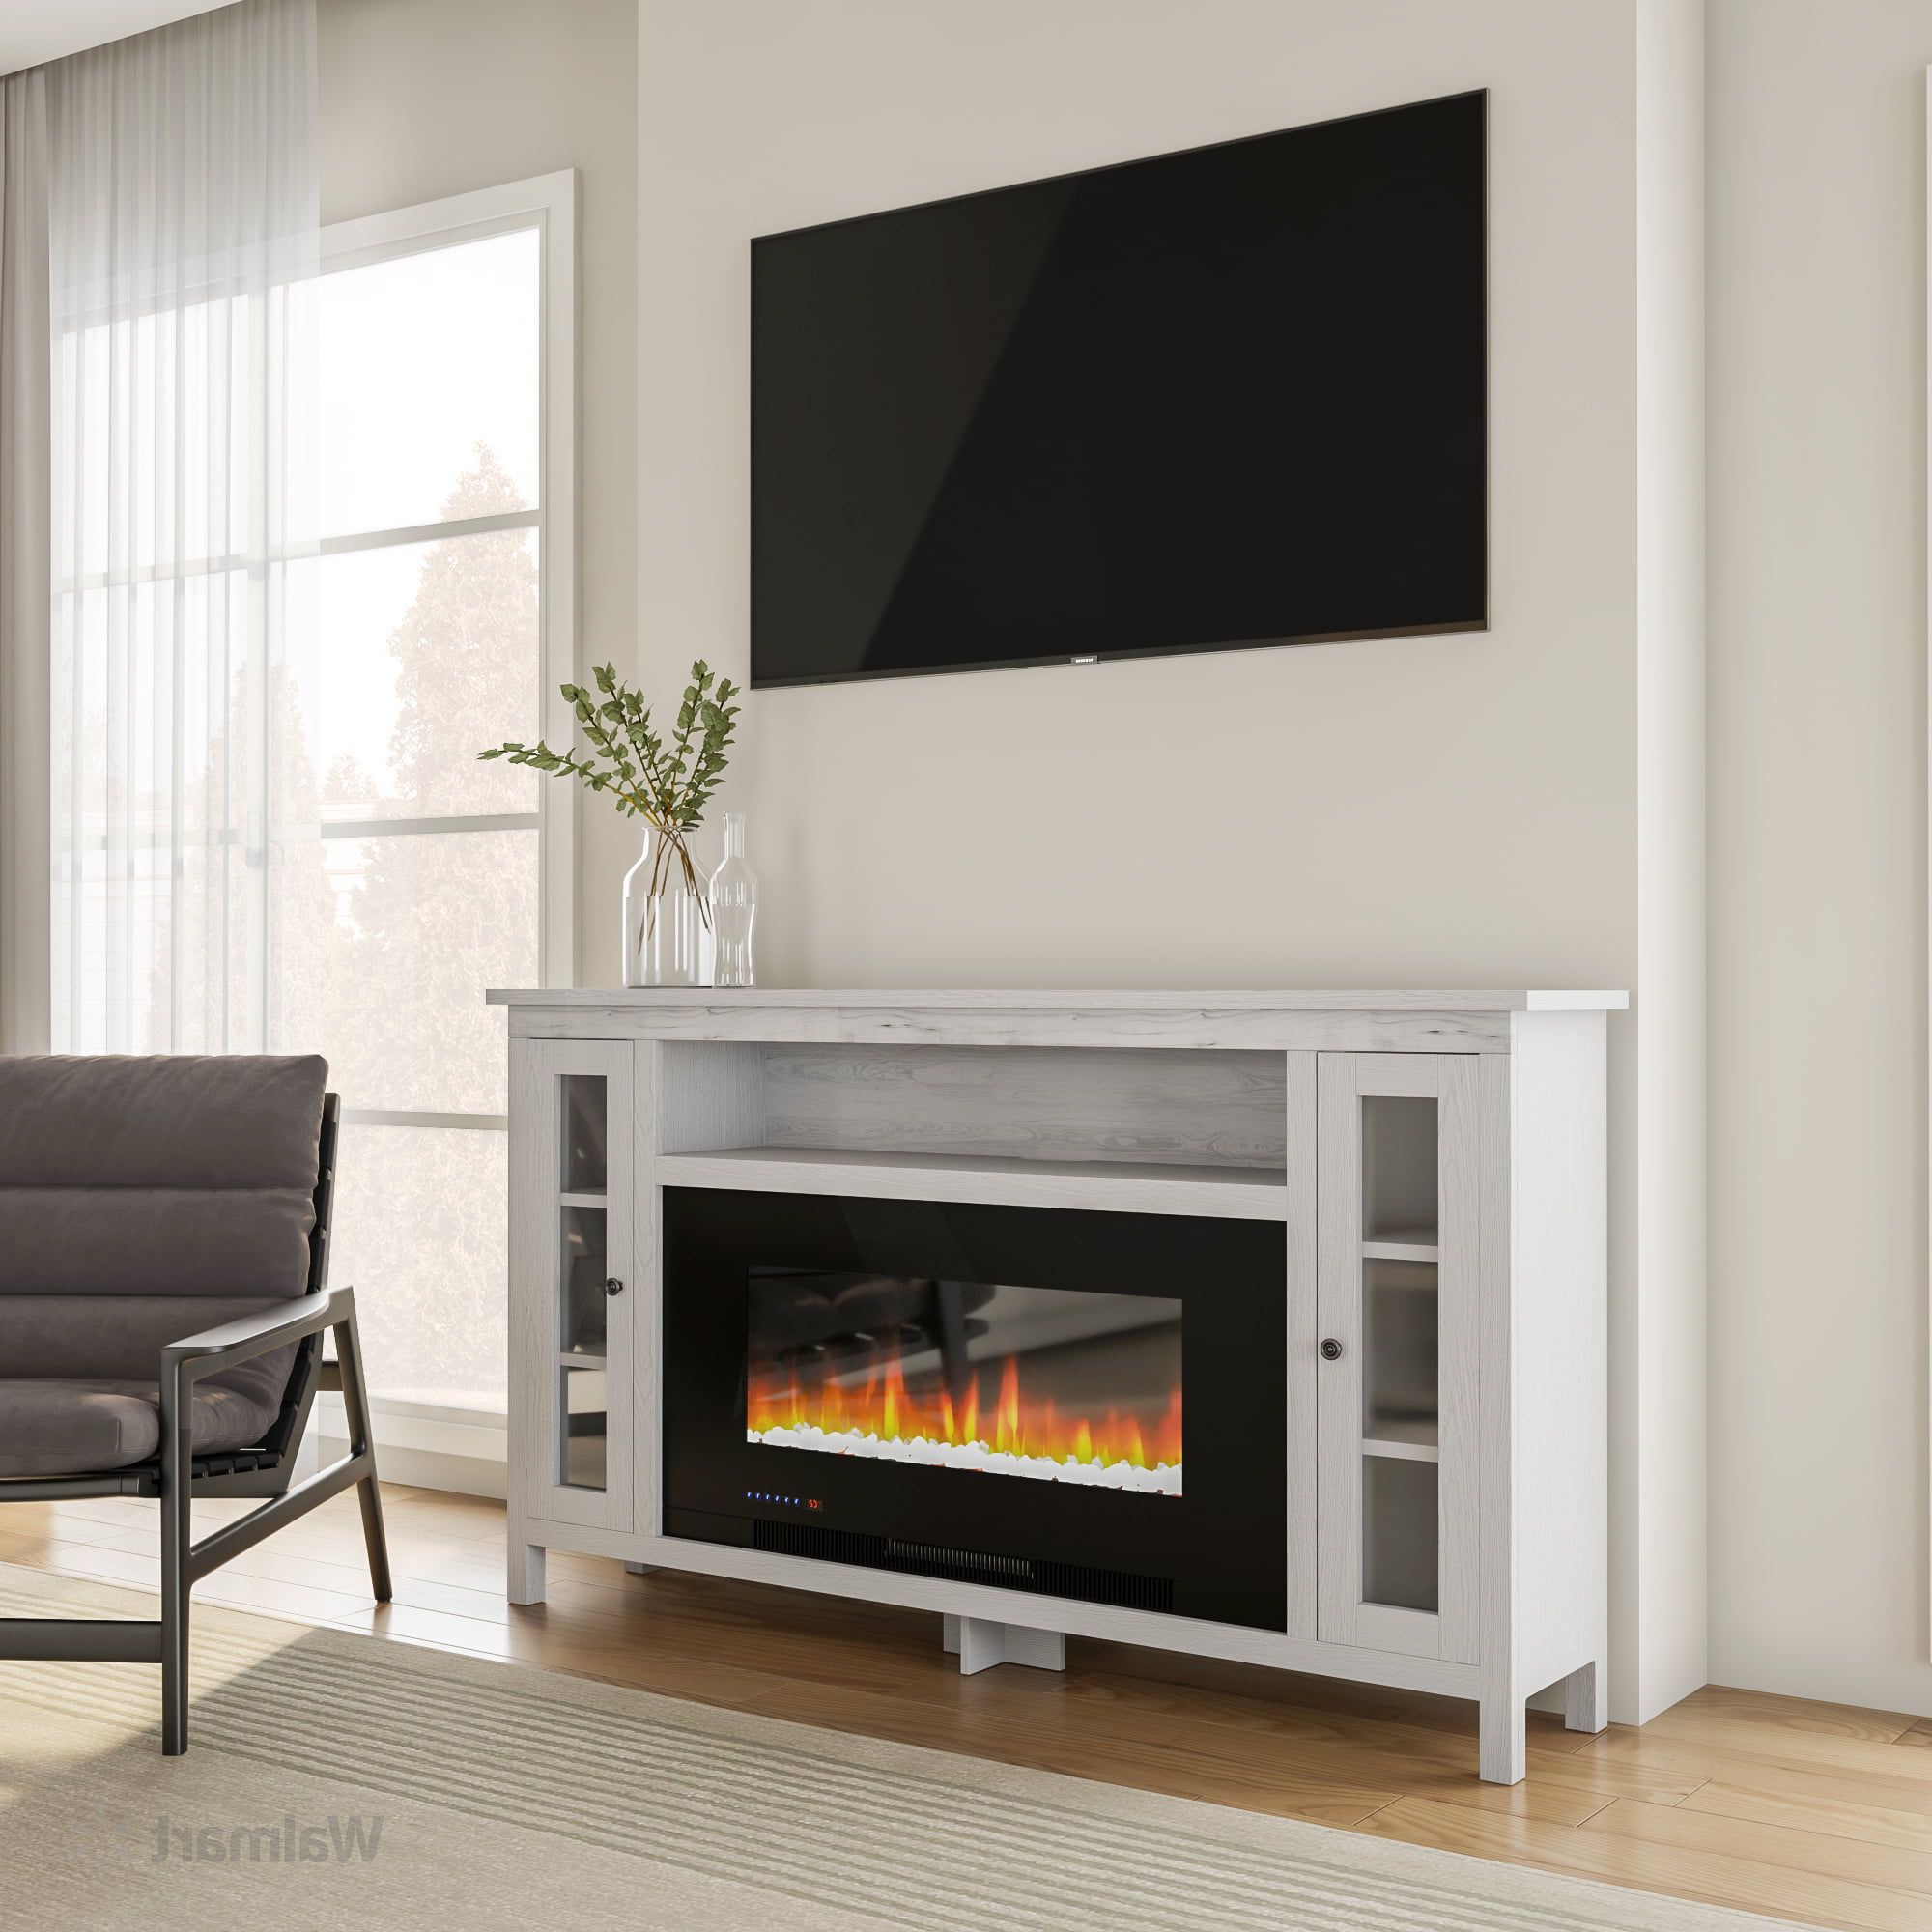 Widely Used Electric Fireplace Tv Stands With Regard To Cambridge Somerset 70 In (View 7 of 15)